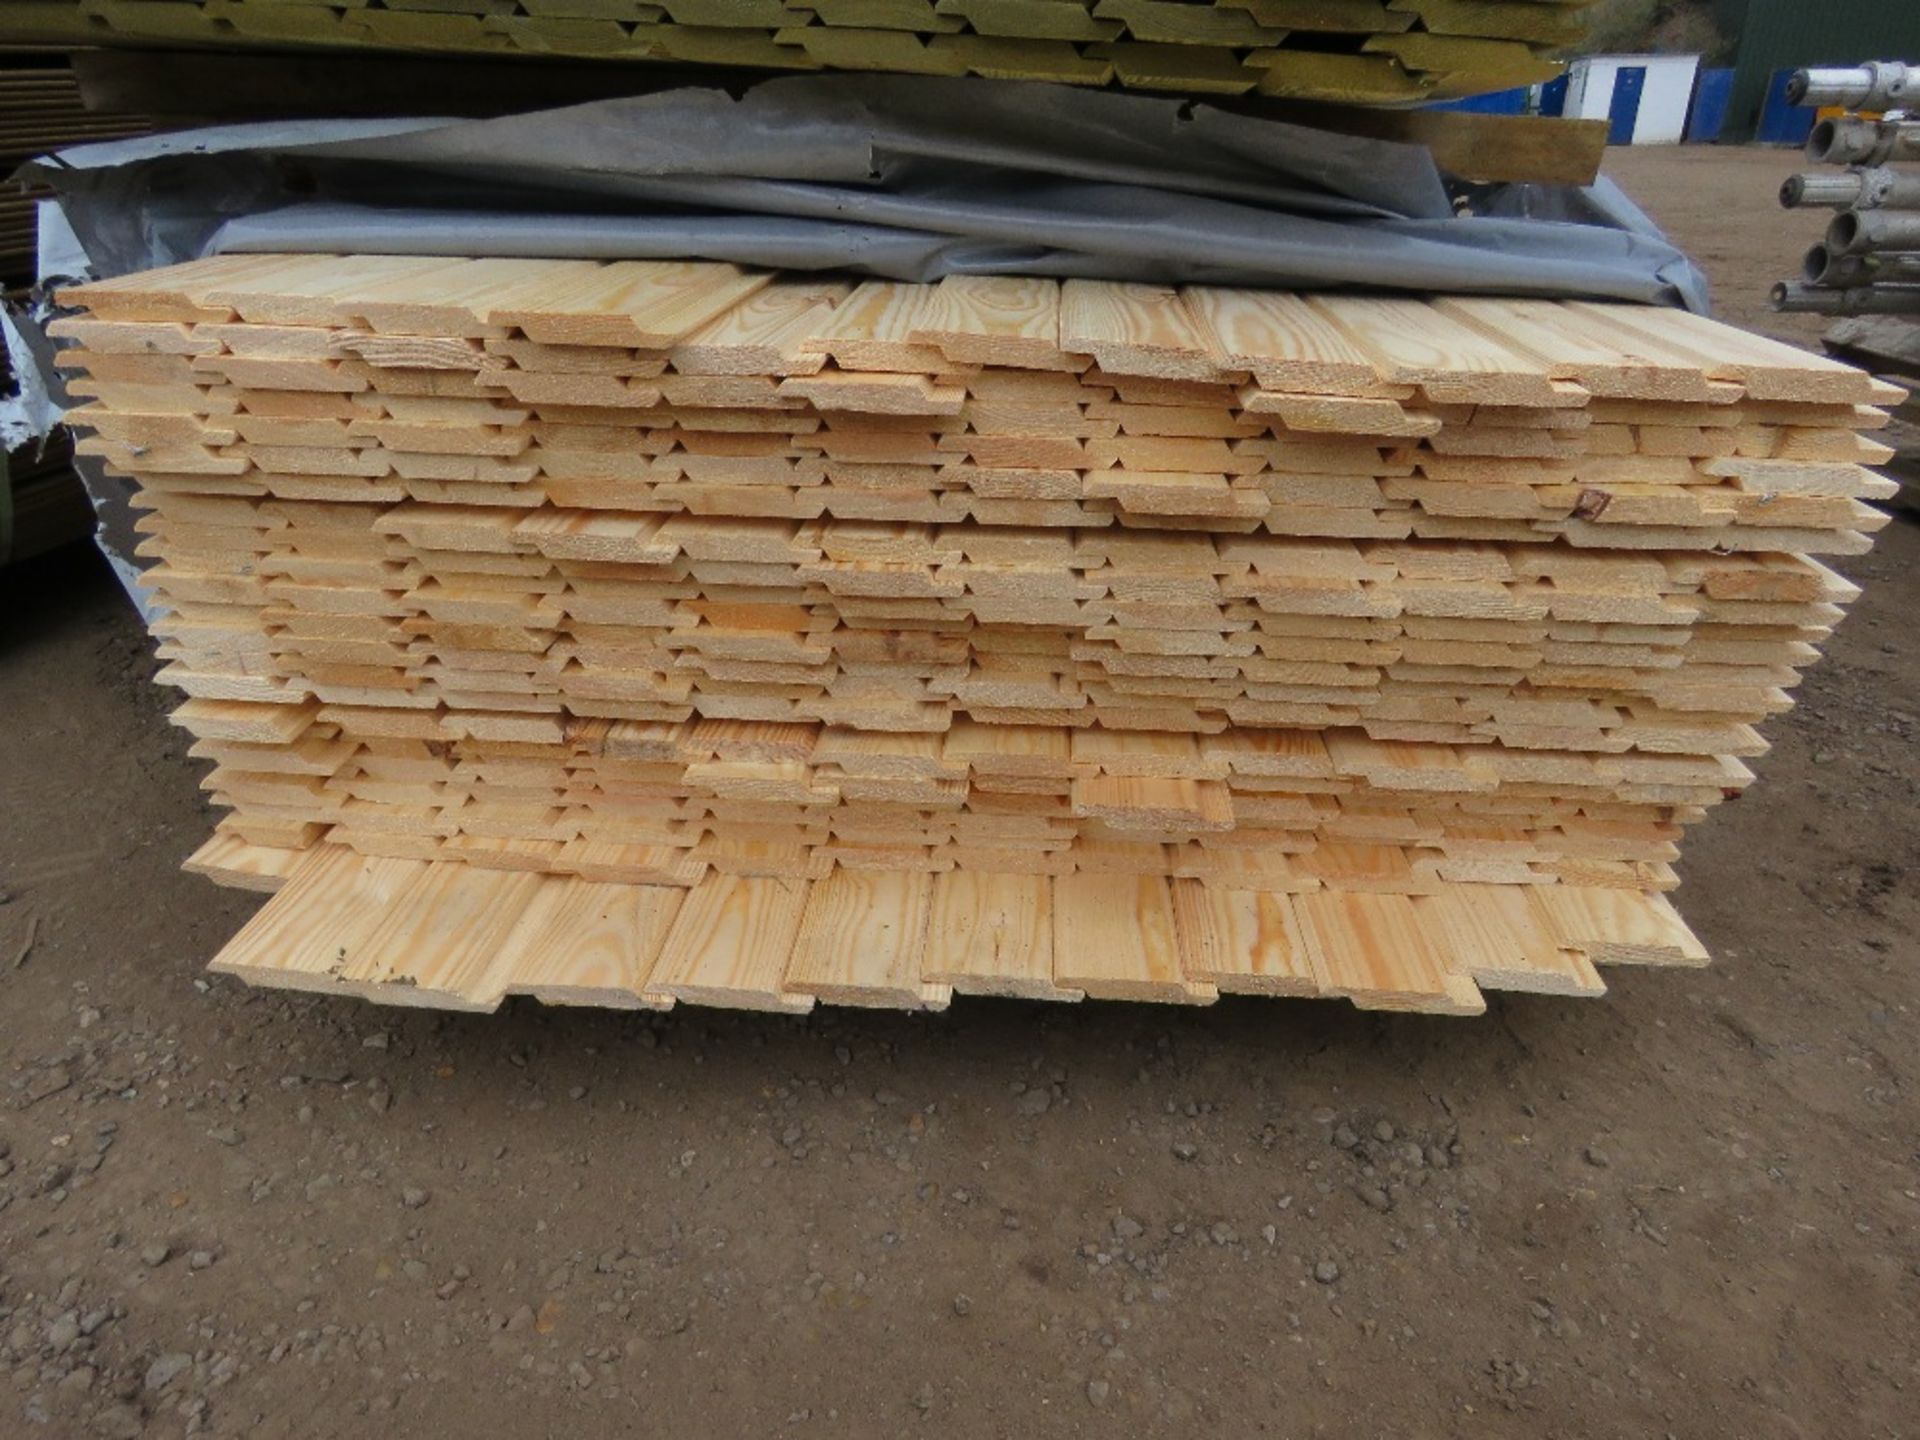 PACK OF UNTREATED SHIPLAP TYPE TIMBER CLADDING BOARDS: 1.75M LENGTH X 100MM WIDTH APPROX. - Image 2 of 3